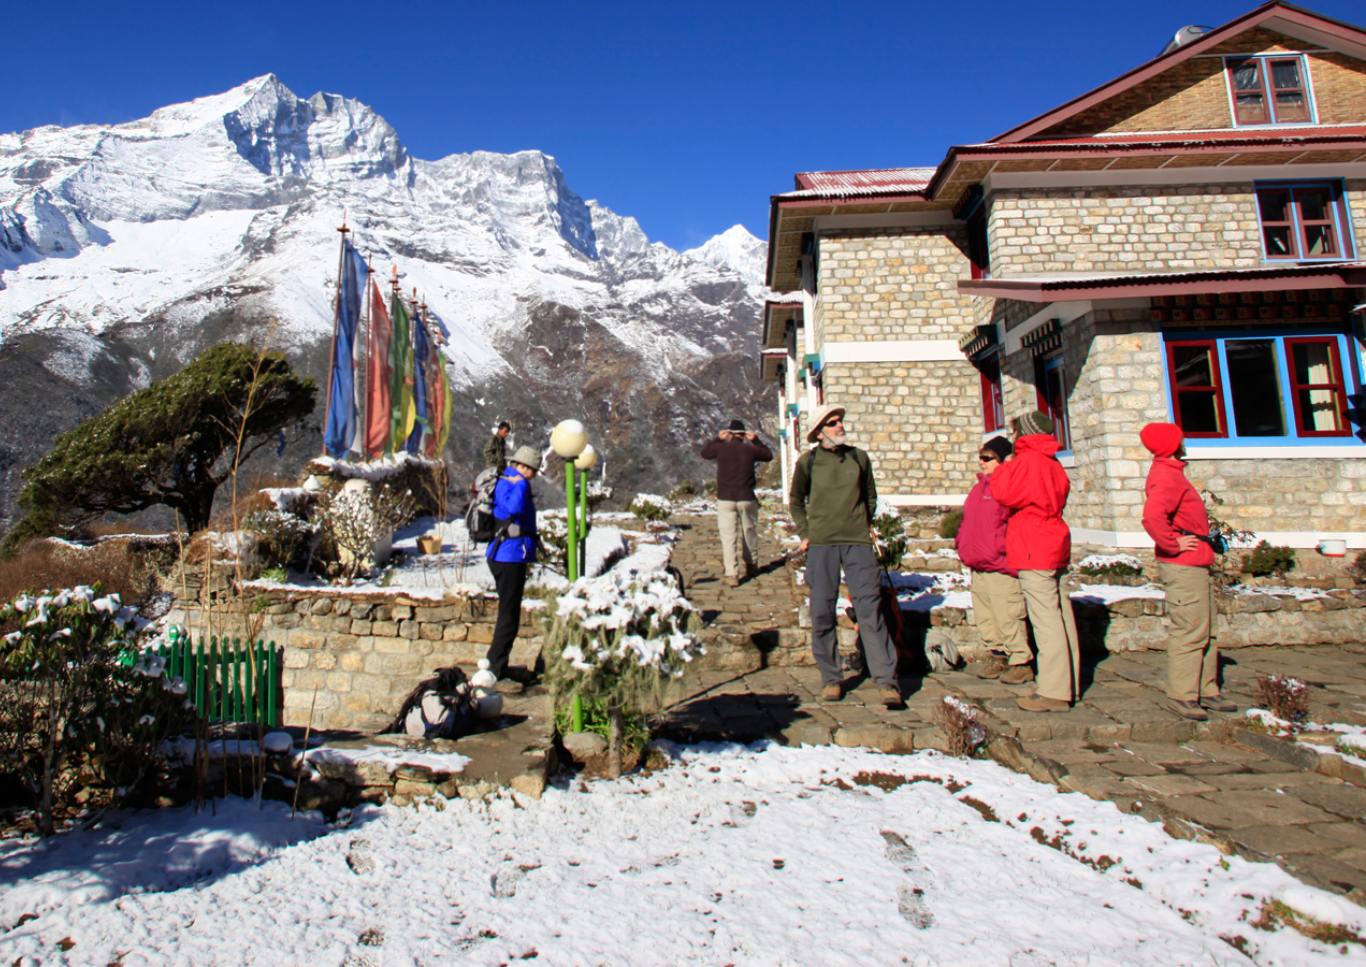 Trekking group at luxury teahouse on trail to Everest